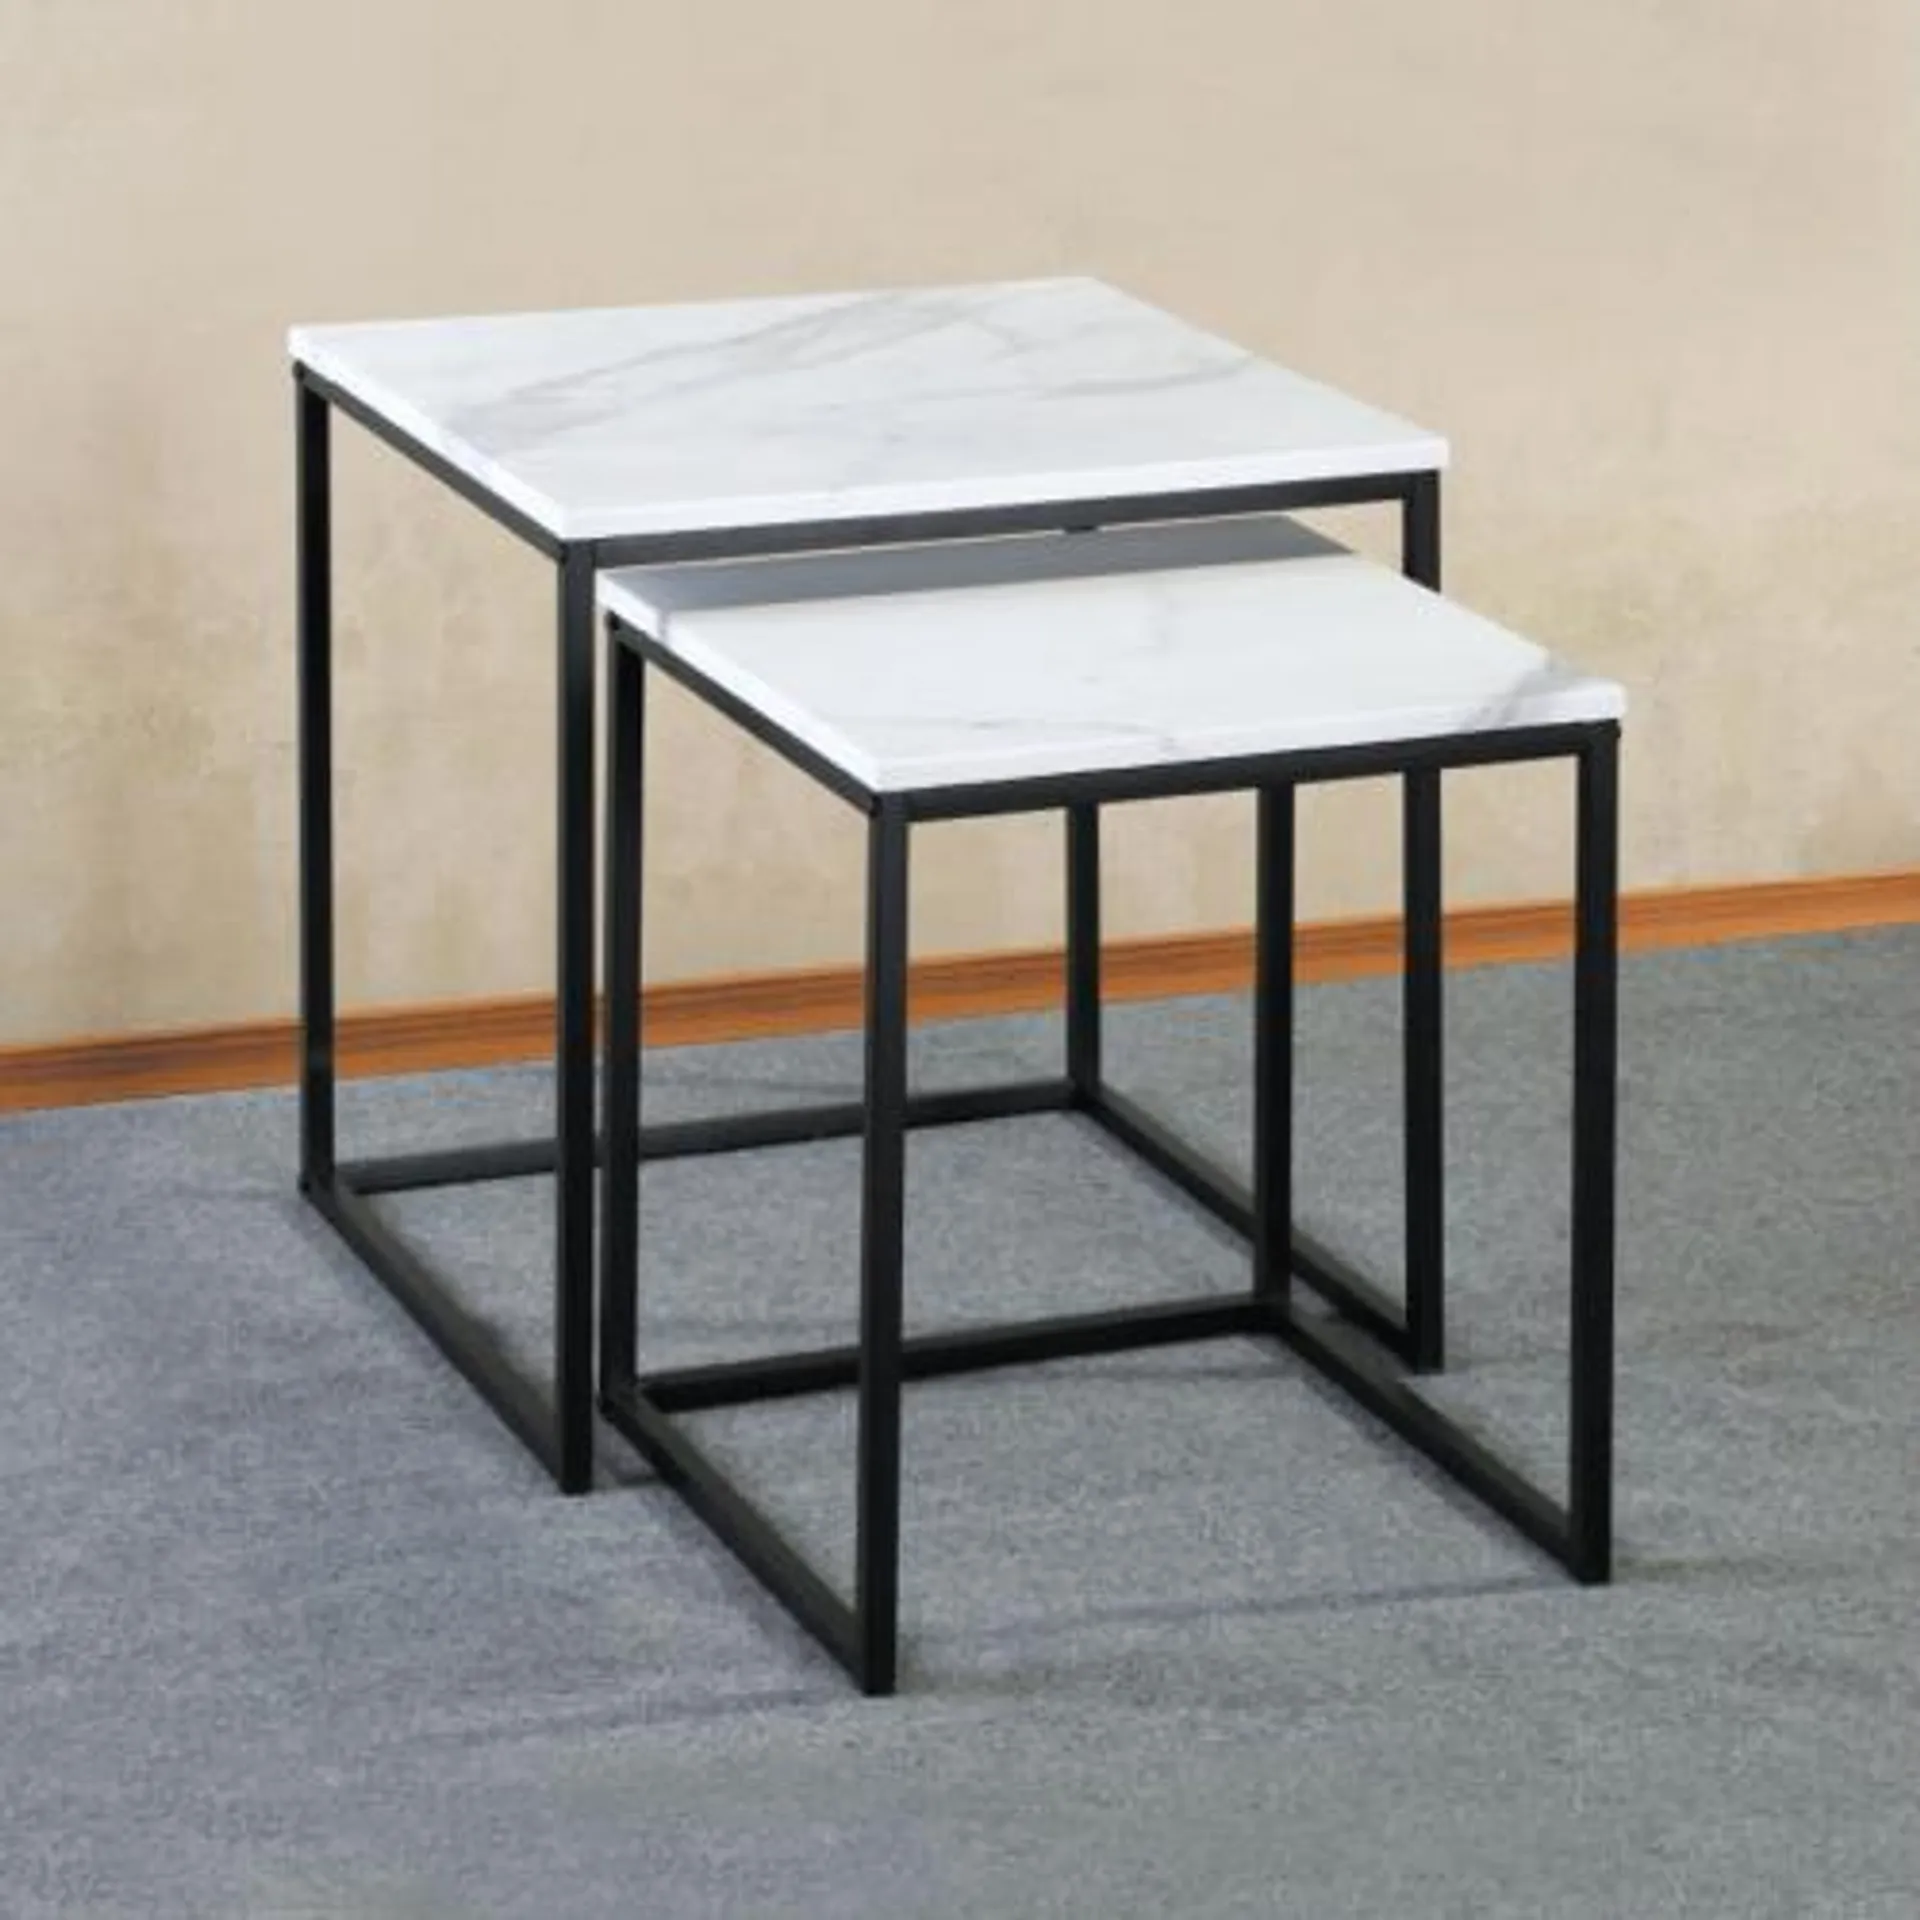 Set of 2 Square Coffee Tables with Black Frame